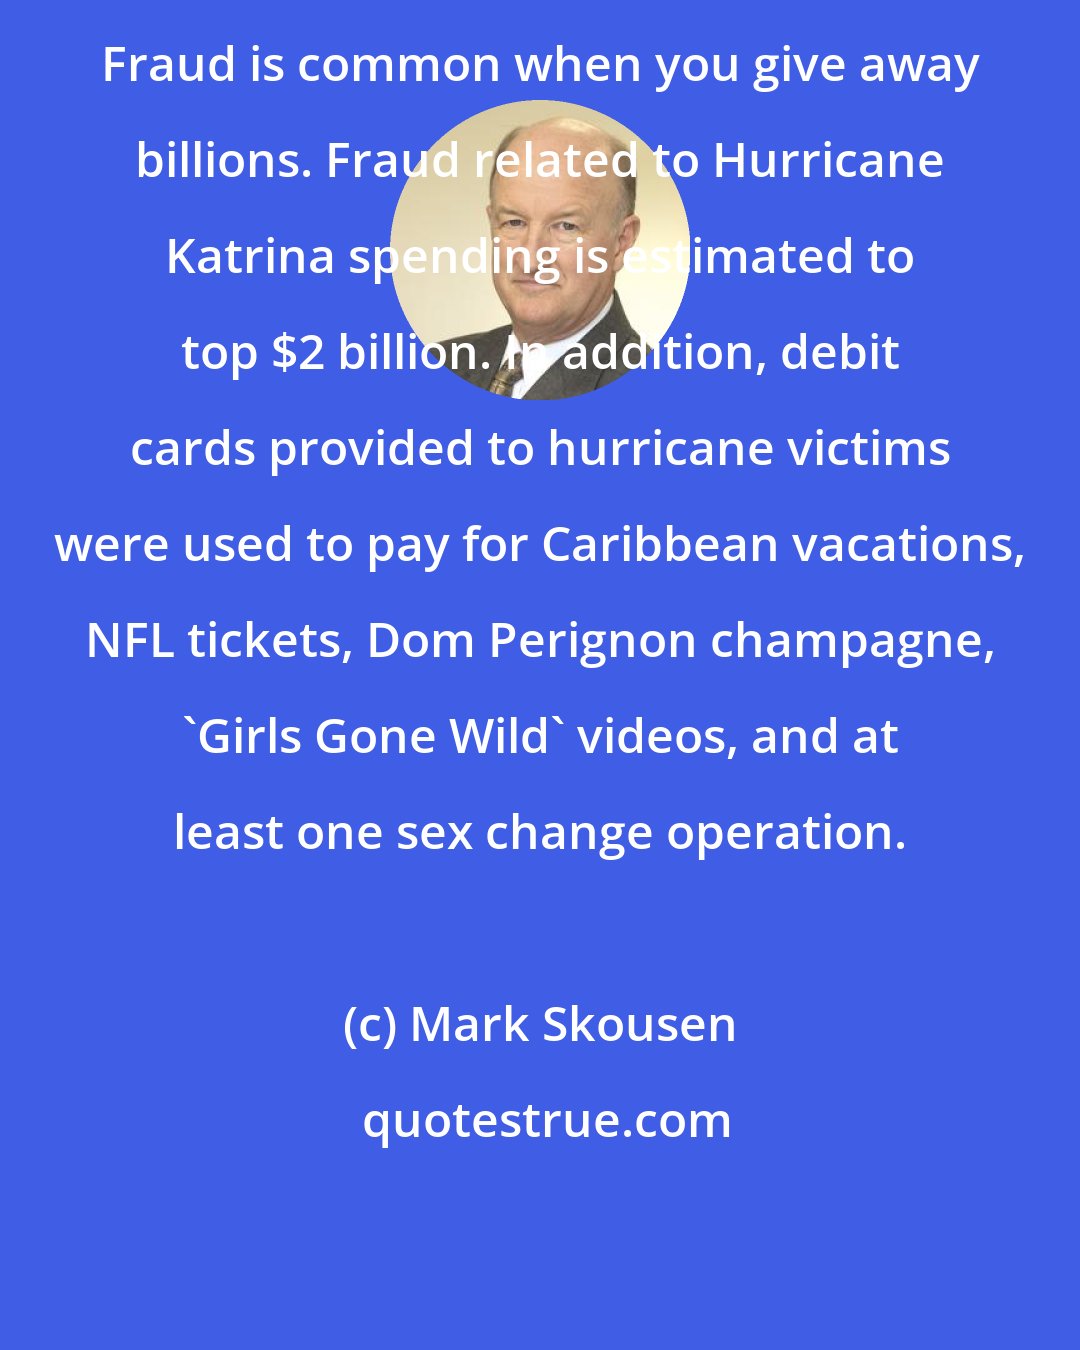 Mark Skousen: Fraud is common when you give away billions. Fraud related to Hurricane Katrina spending is estimated to top $2 billion. In addition, debit cards provided to hurricane victims were used to pay for Caribbean vacations, NFL tickets, Dom Perignon champagne, 'Girls Gone Wild' videos, and at least one sex change operation.